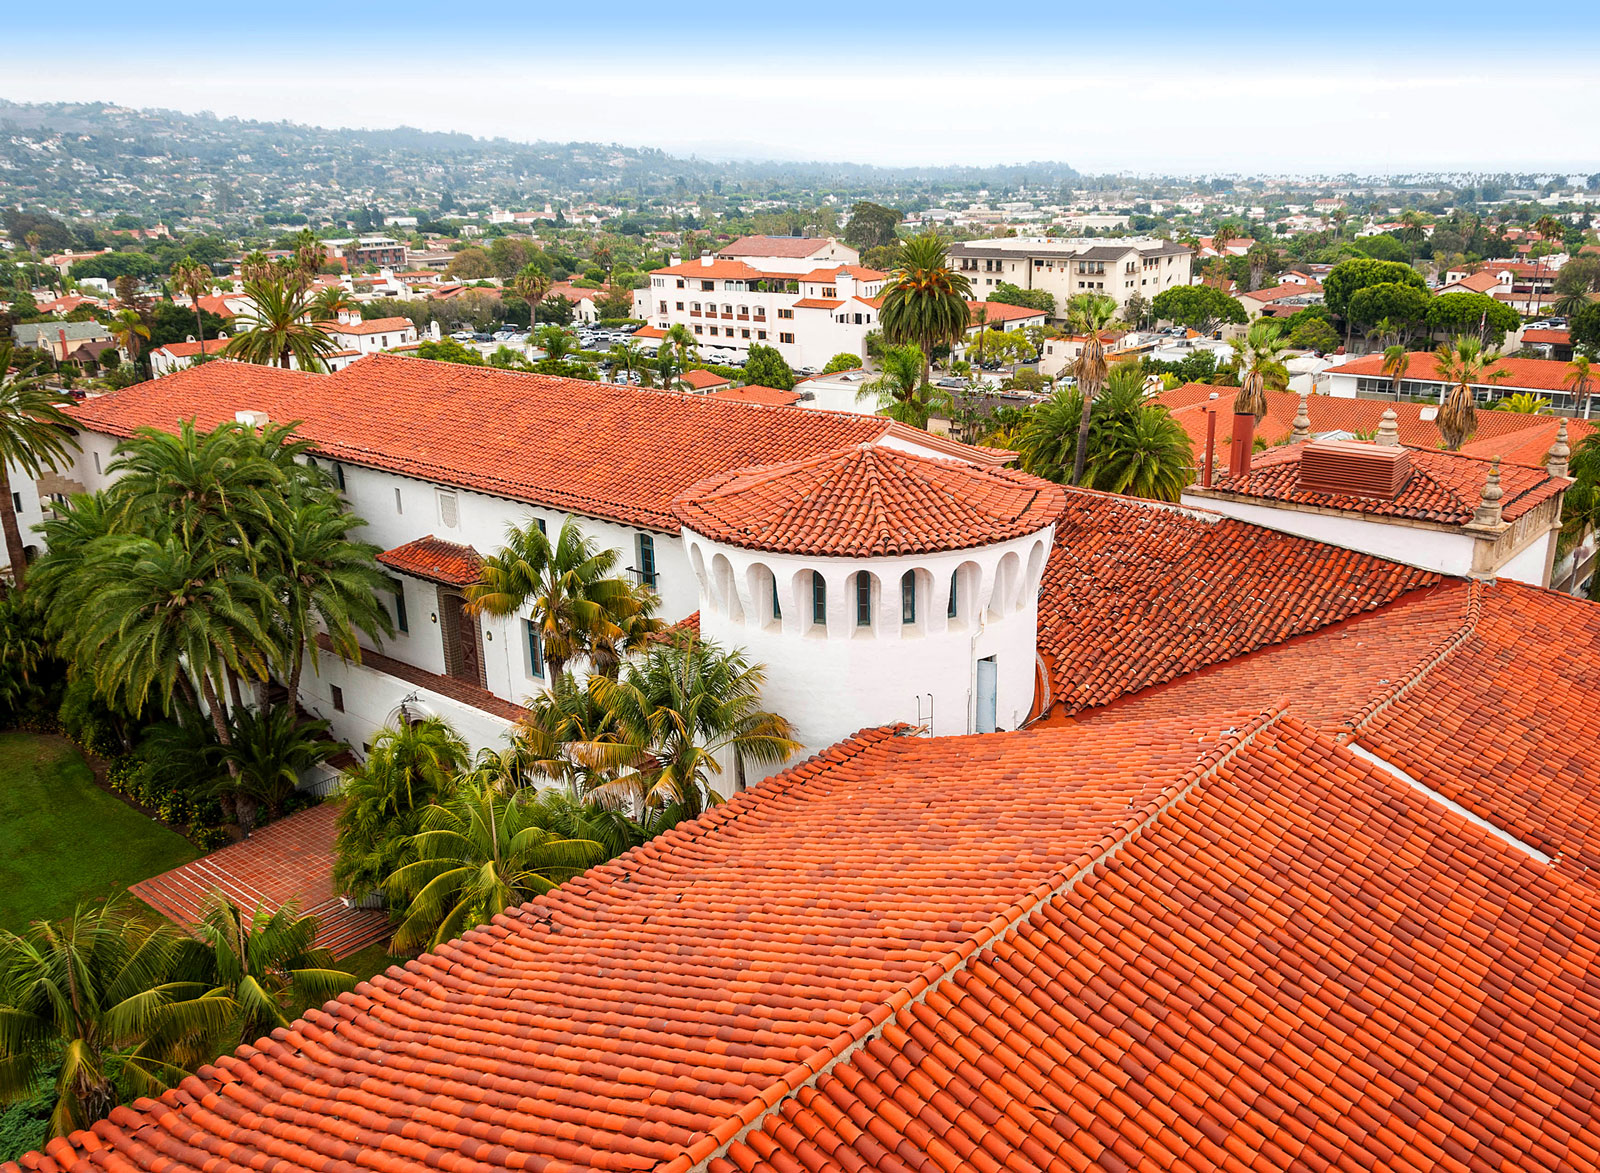 View from the clock tower at the Santa Barbara County Courthouse